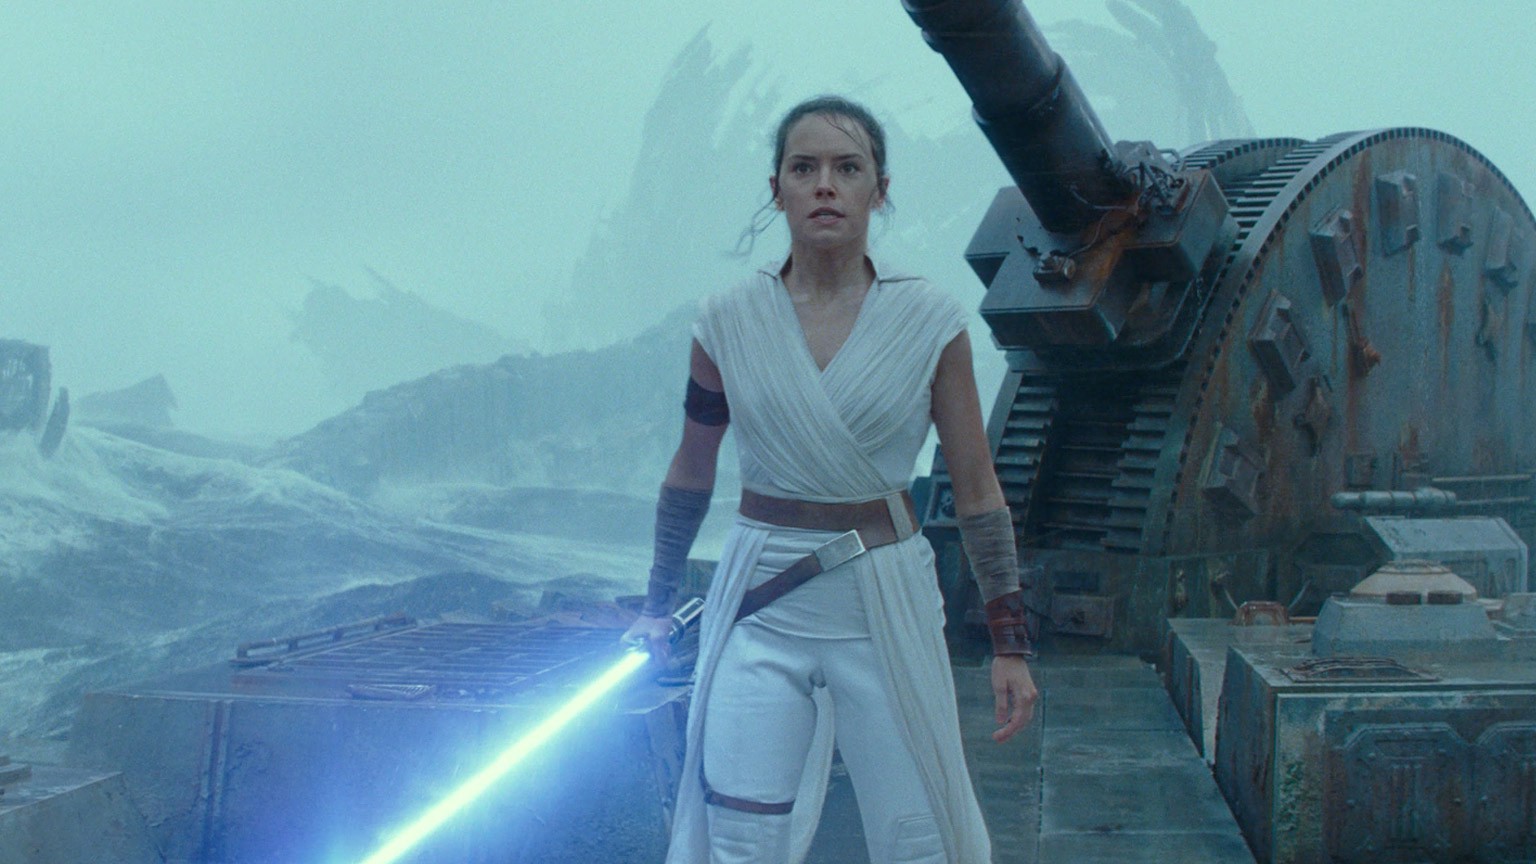 Kathleen Kennedy Talks Thematic Links Between Dawn Of The Jedi And New Jedi Order Eras